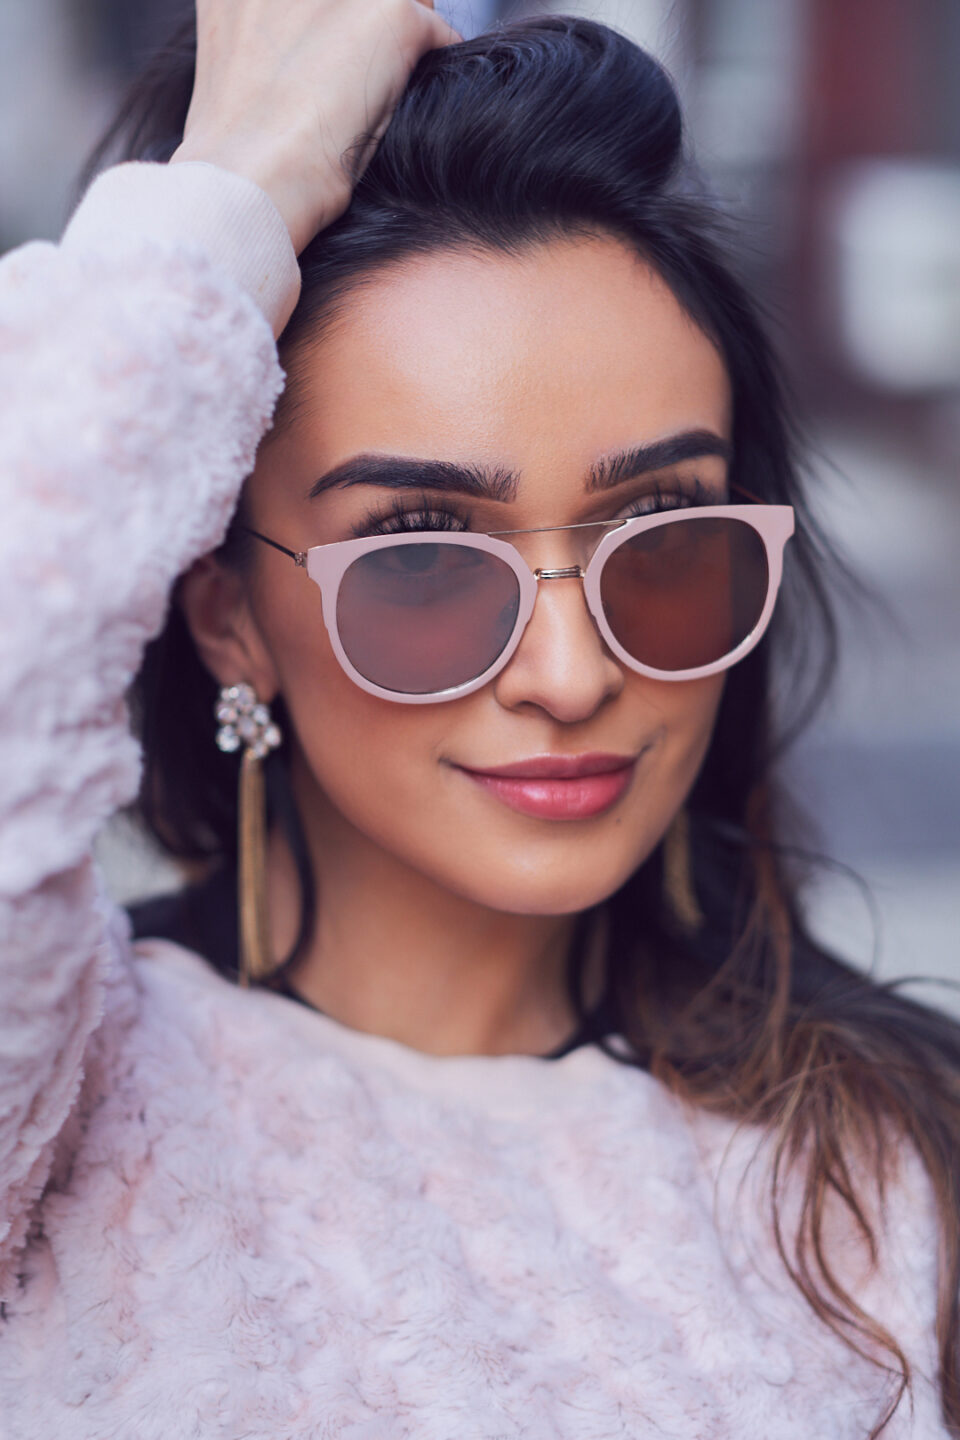 Portrait Photography Poses - Lifestyle Photography Woman - Fashion Photography Tips - Model Poses -Ramsha at Sweet Time Dessert Cafe in New York City - Fuji X Pro2 with xf 56mm f1.2